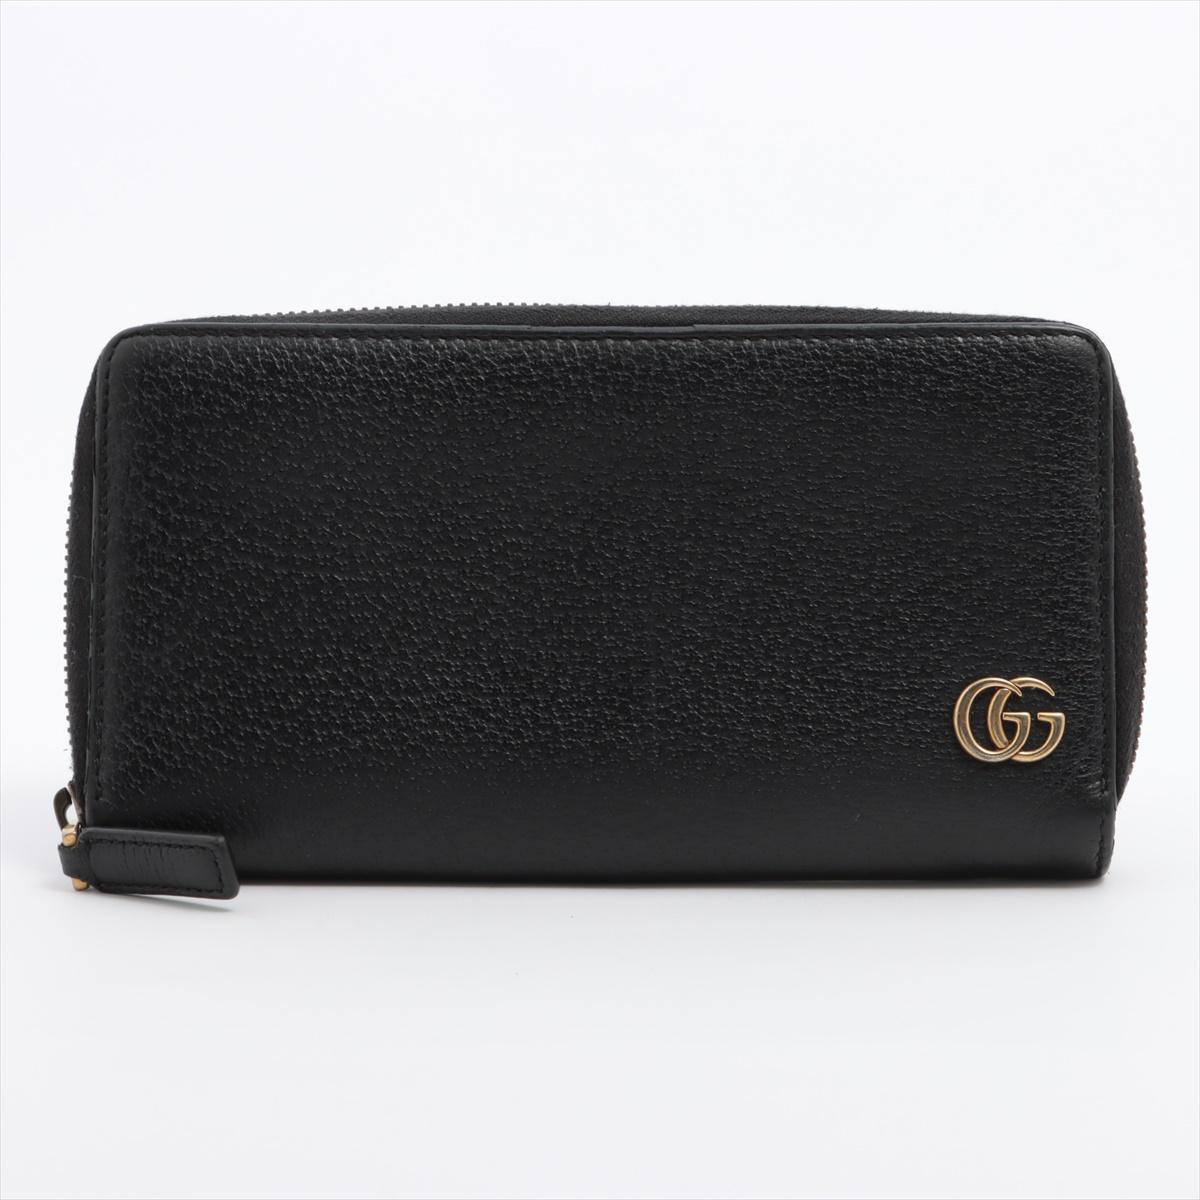 The Gucci GG Marmont Calf Leather Zip Around Long Wallet in Black is a stunning exemplar of the brand's fusion of luxury and contemporary design. The supple black calf leather not only adds a touch of opulence but also ensures durability and a